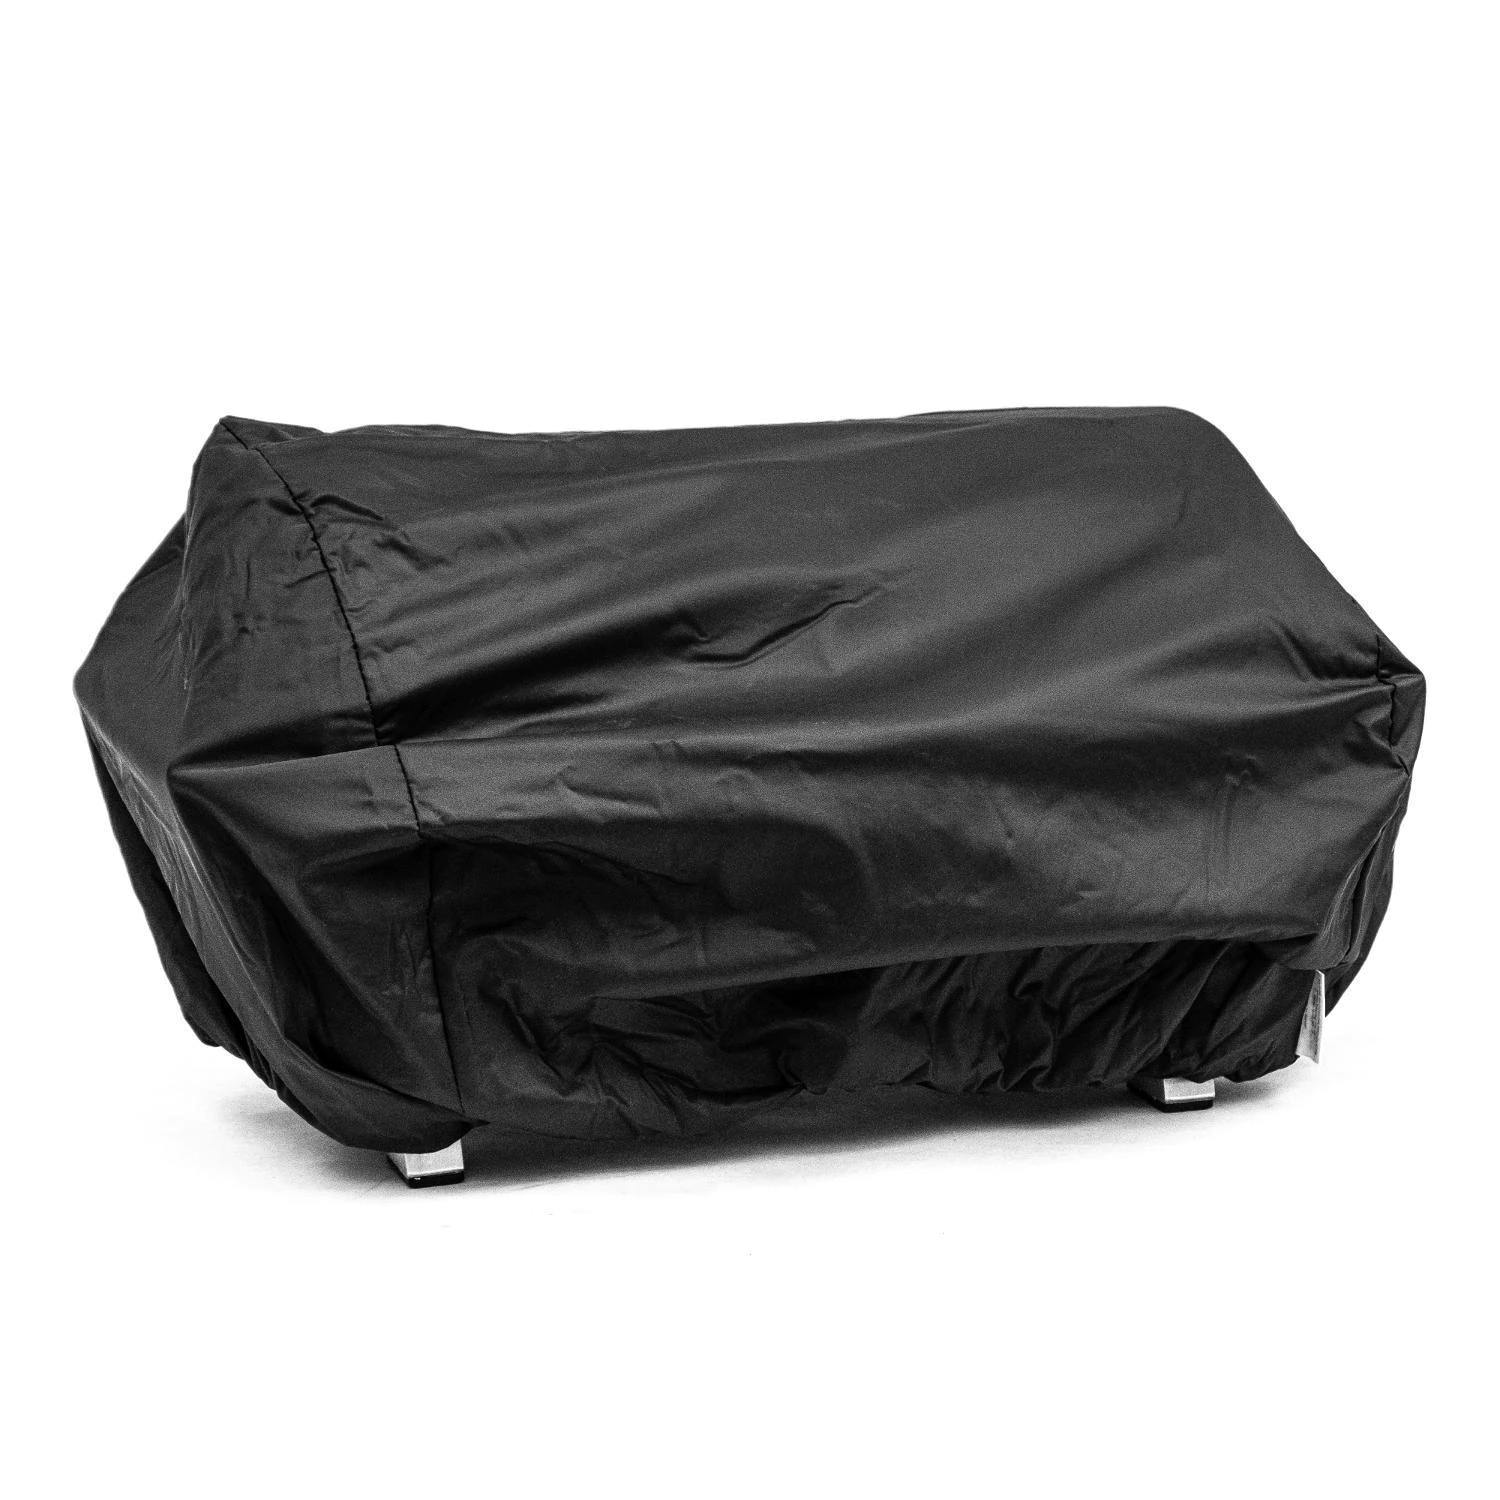 Blaze Grill Cover For Professional LUX Portable Gas Grill